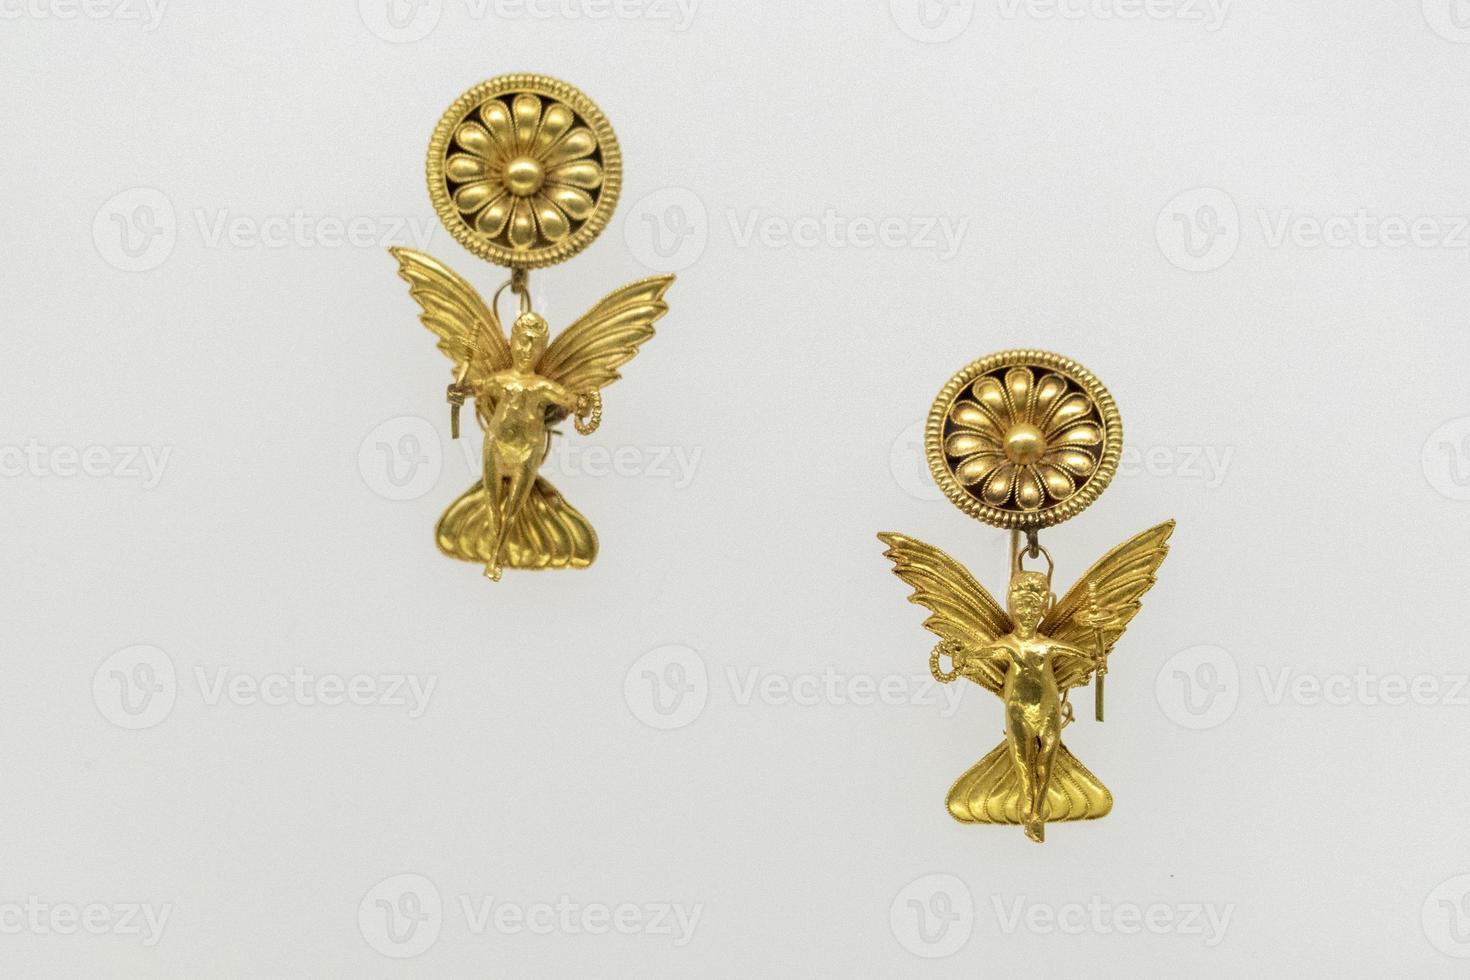 Etruscan style gold earrings necklage pendant detail photo